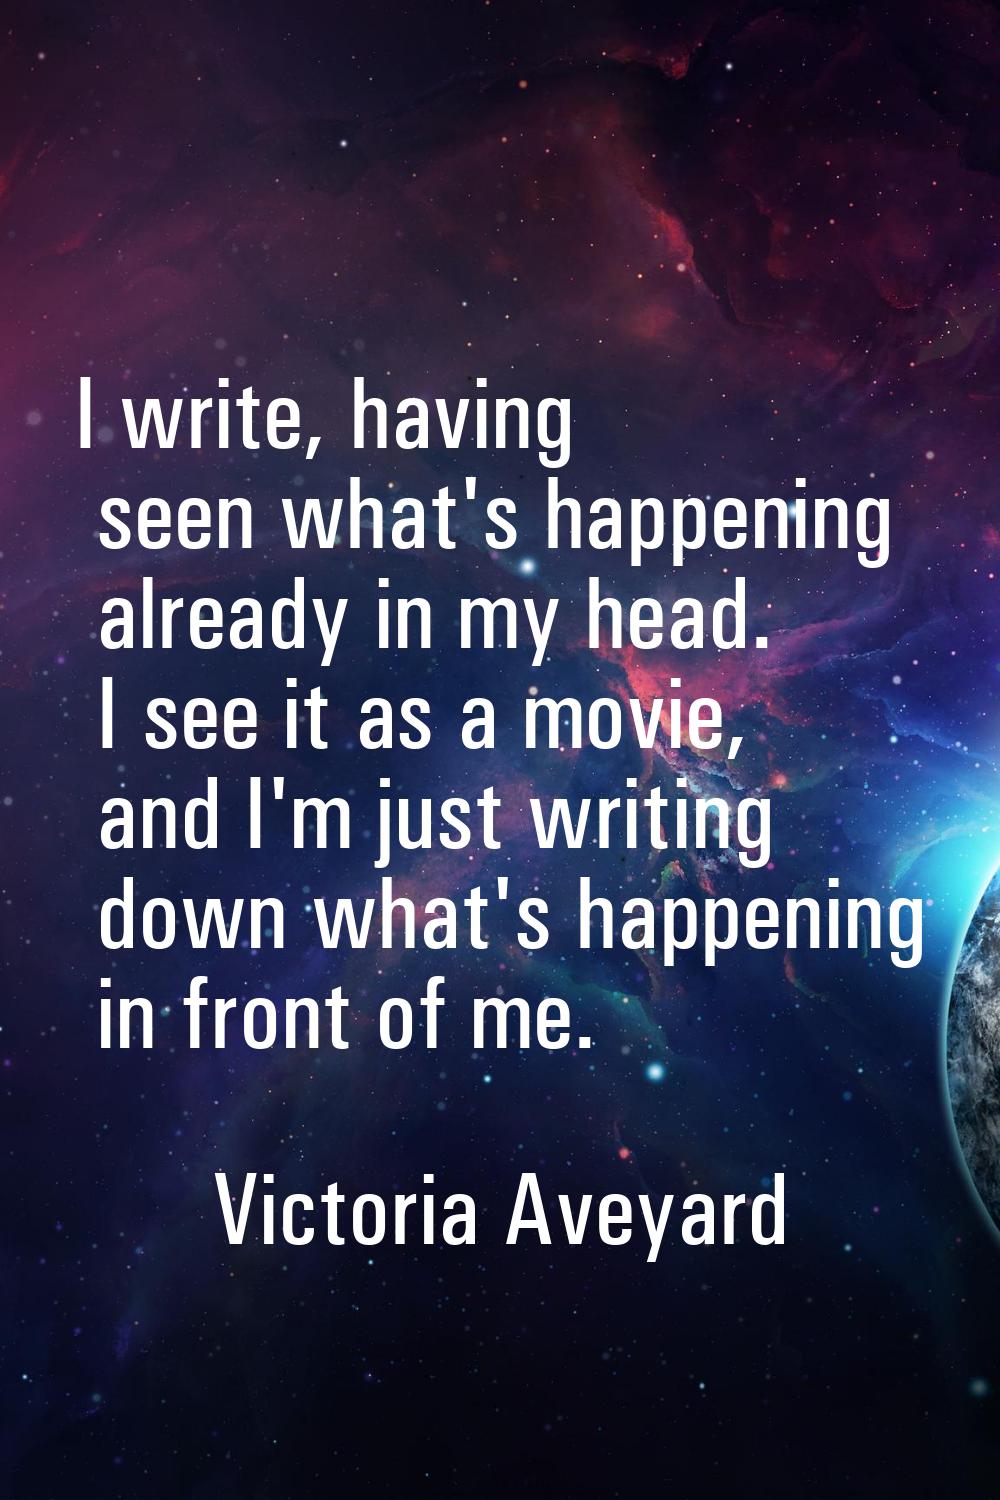 I write, having seen what's happening already in my head. I see it as a movie, and I'm just writing